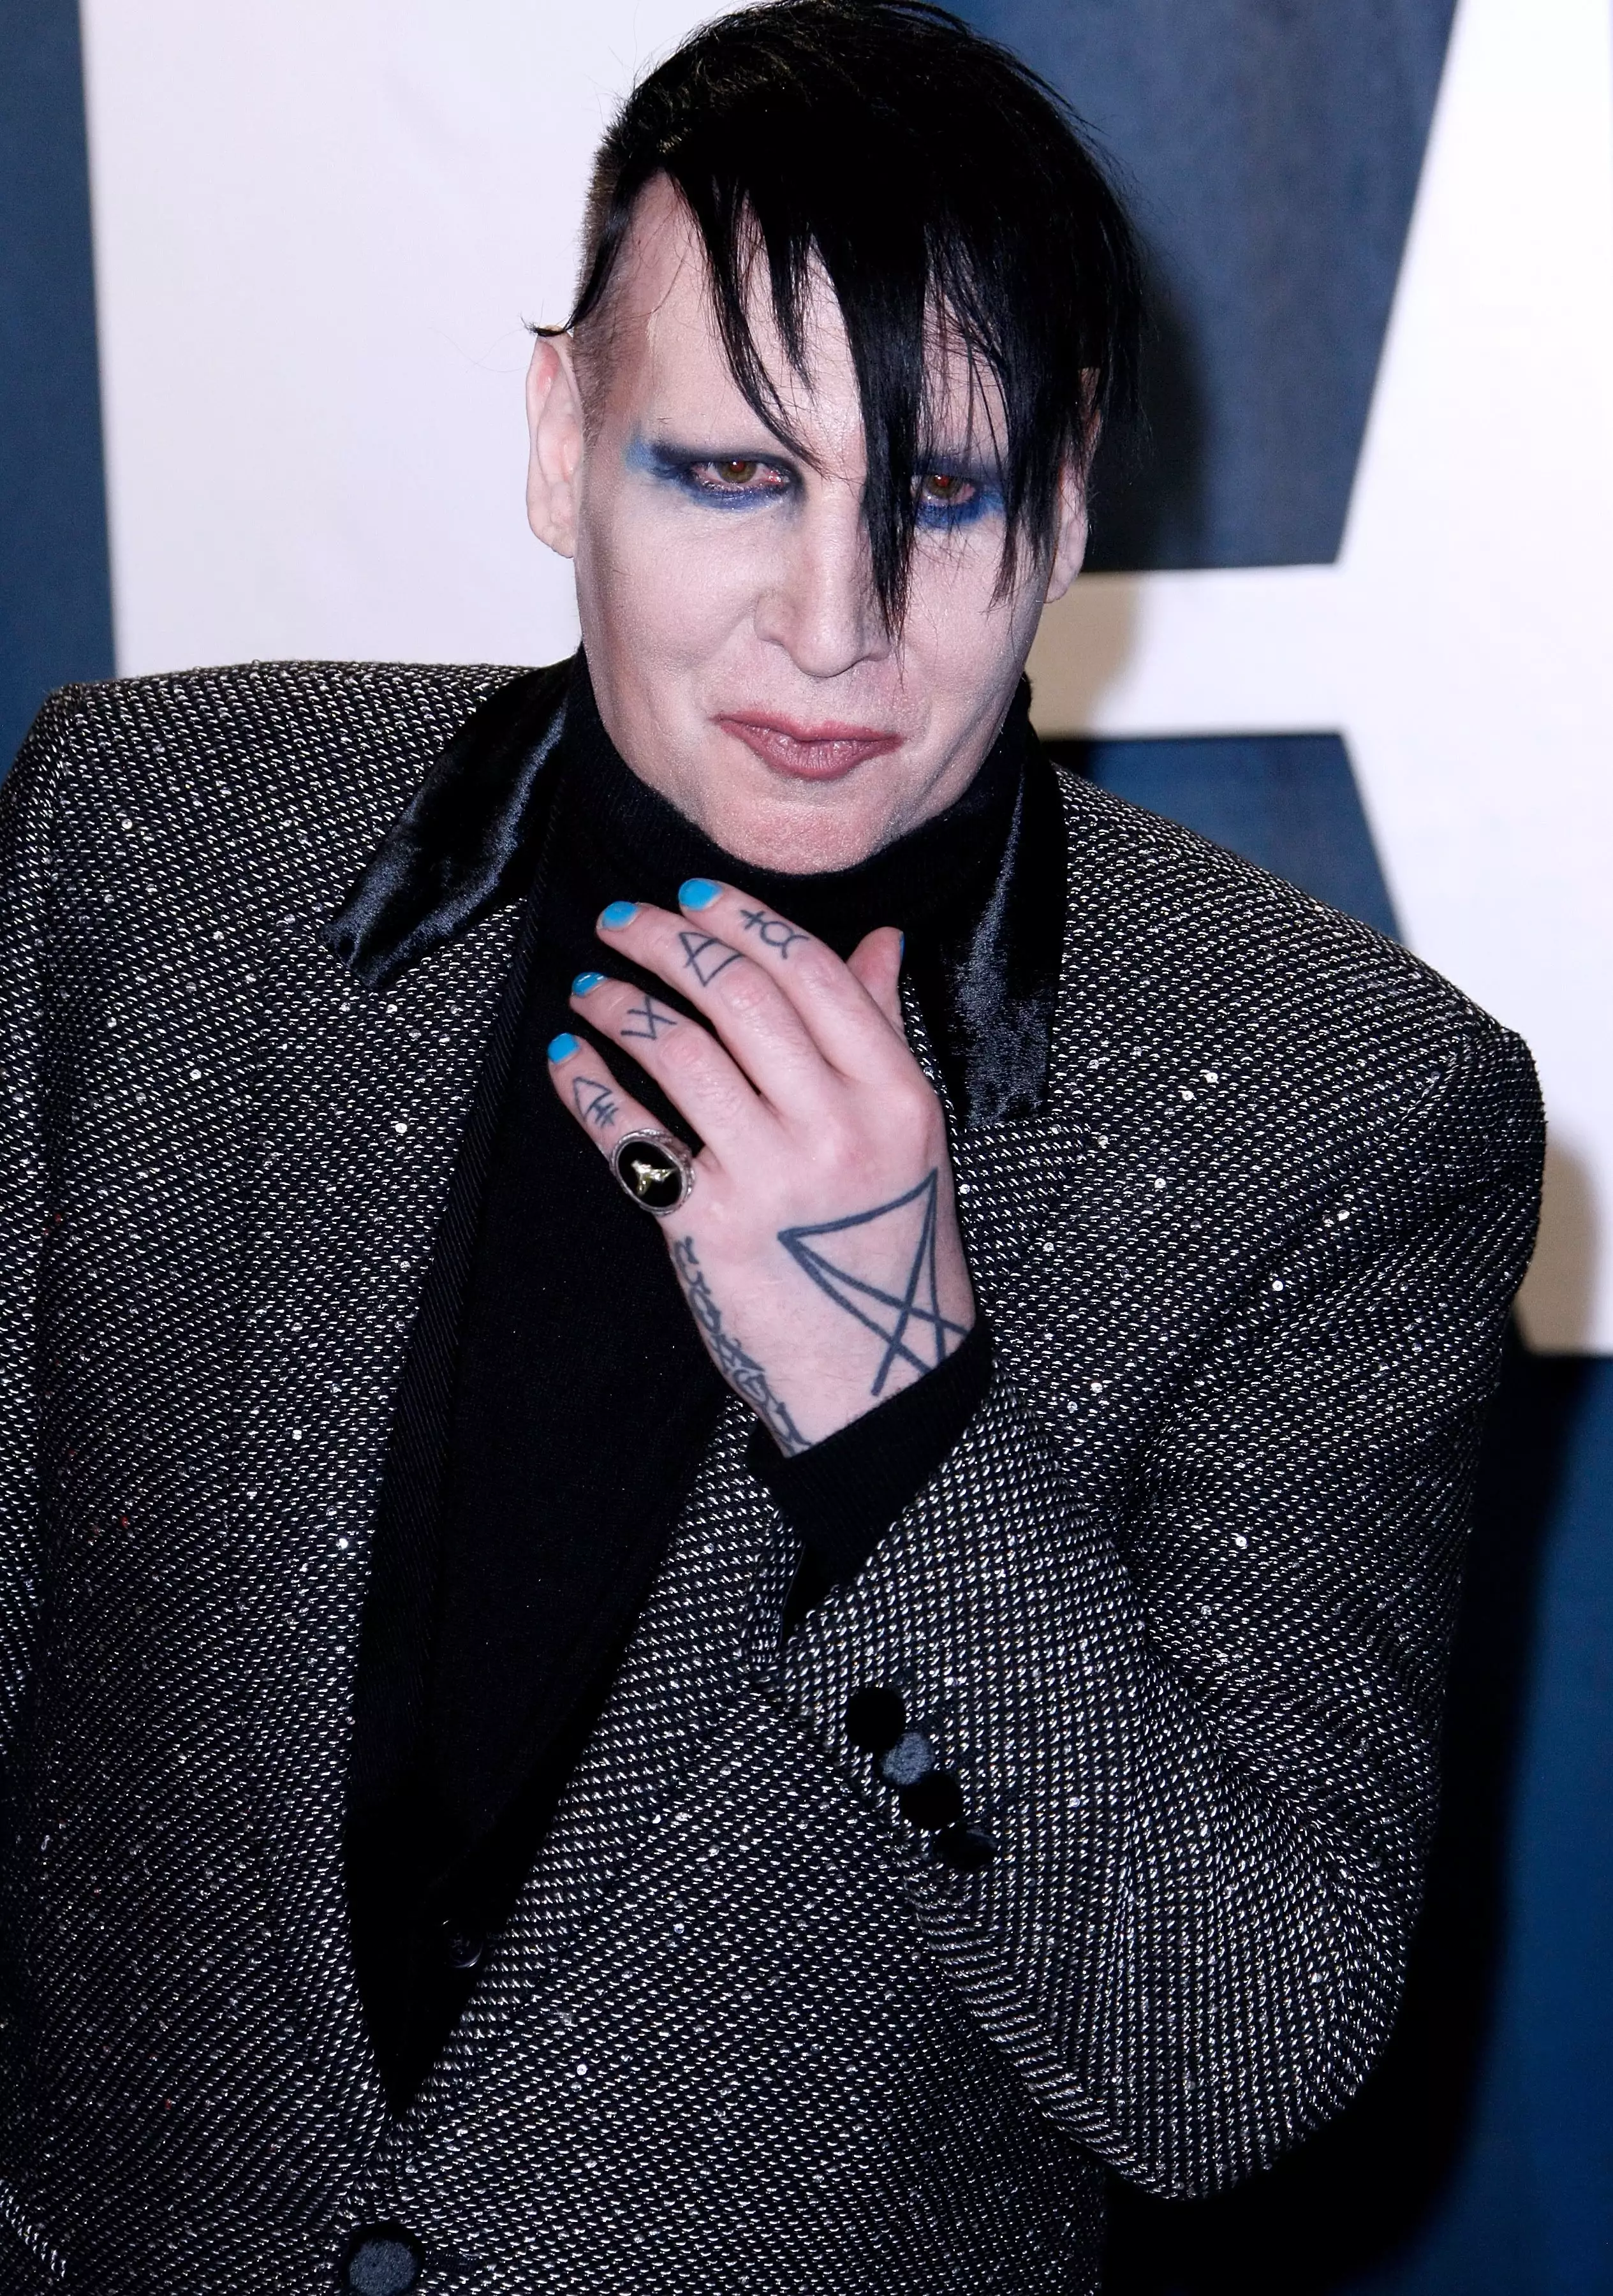 Manson has been known for being a magnet of controversy (